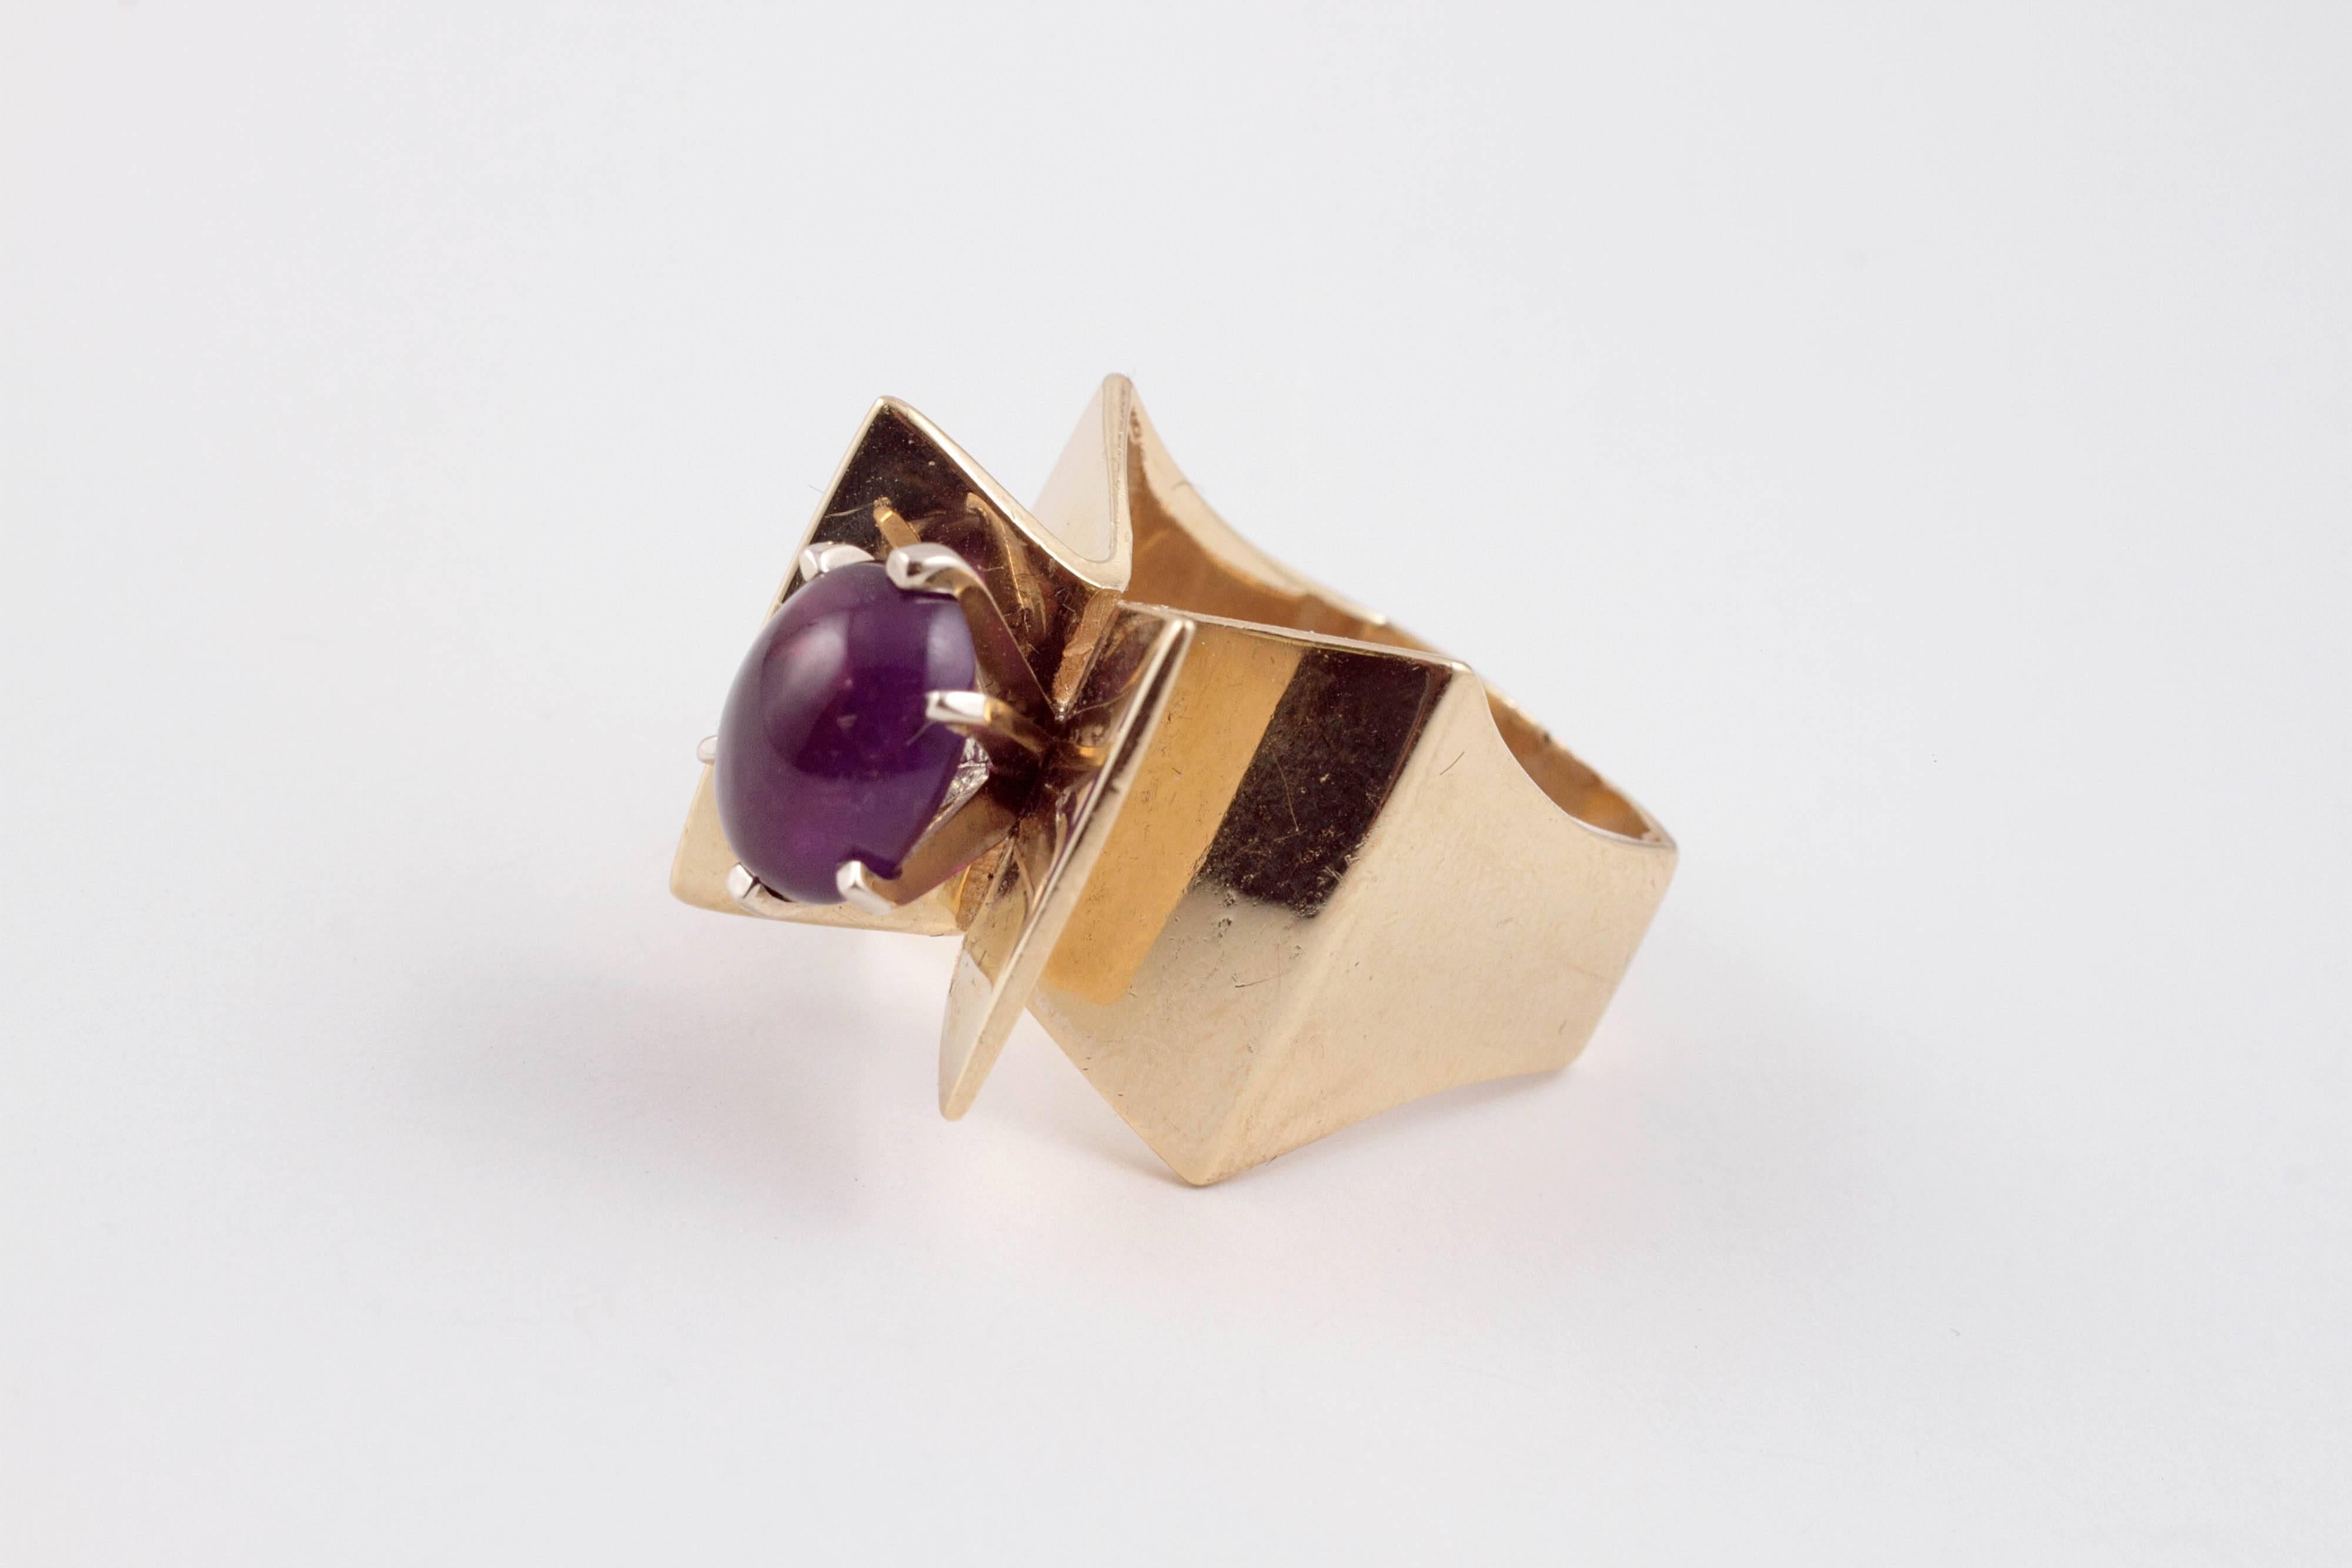 You won't find too many like this one!  In 14 karat yellow gold, with a prong-set, oval-shaped, cabochon-cut amethyst in size 6 1/2.